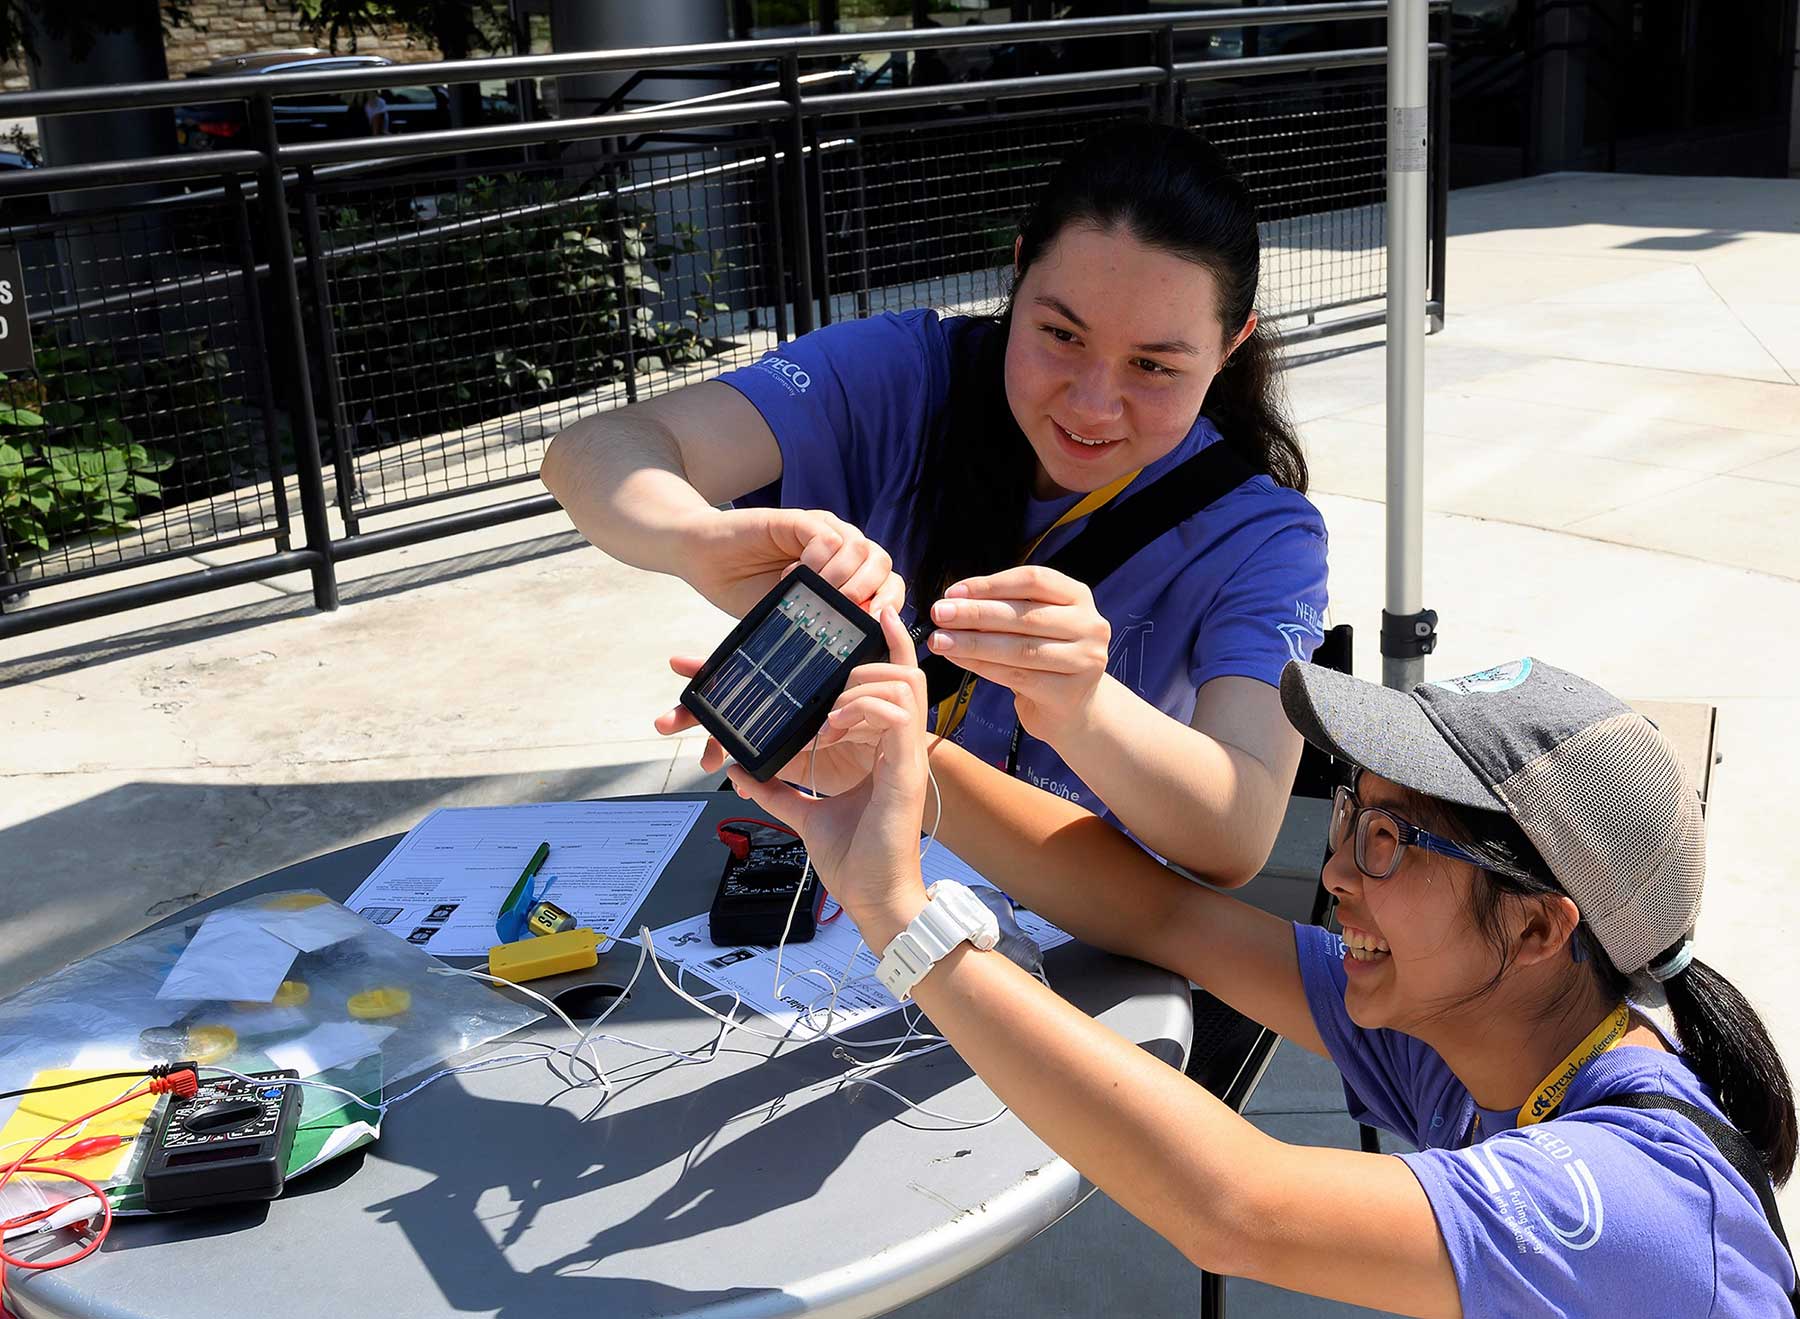 Students using a portable solar panel to generate electricity